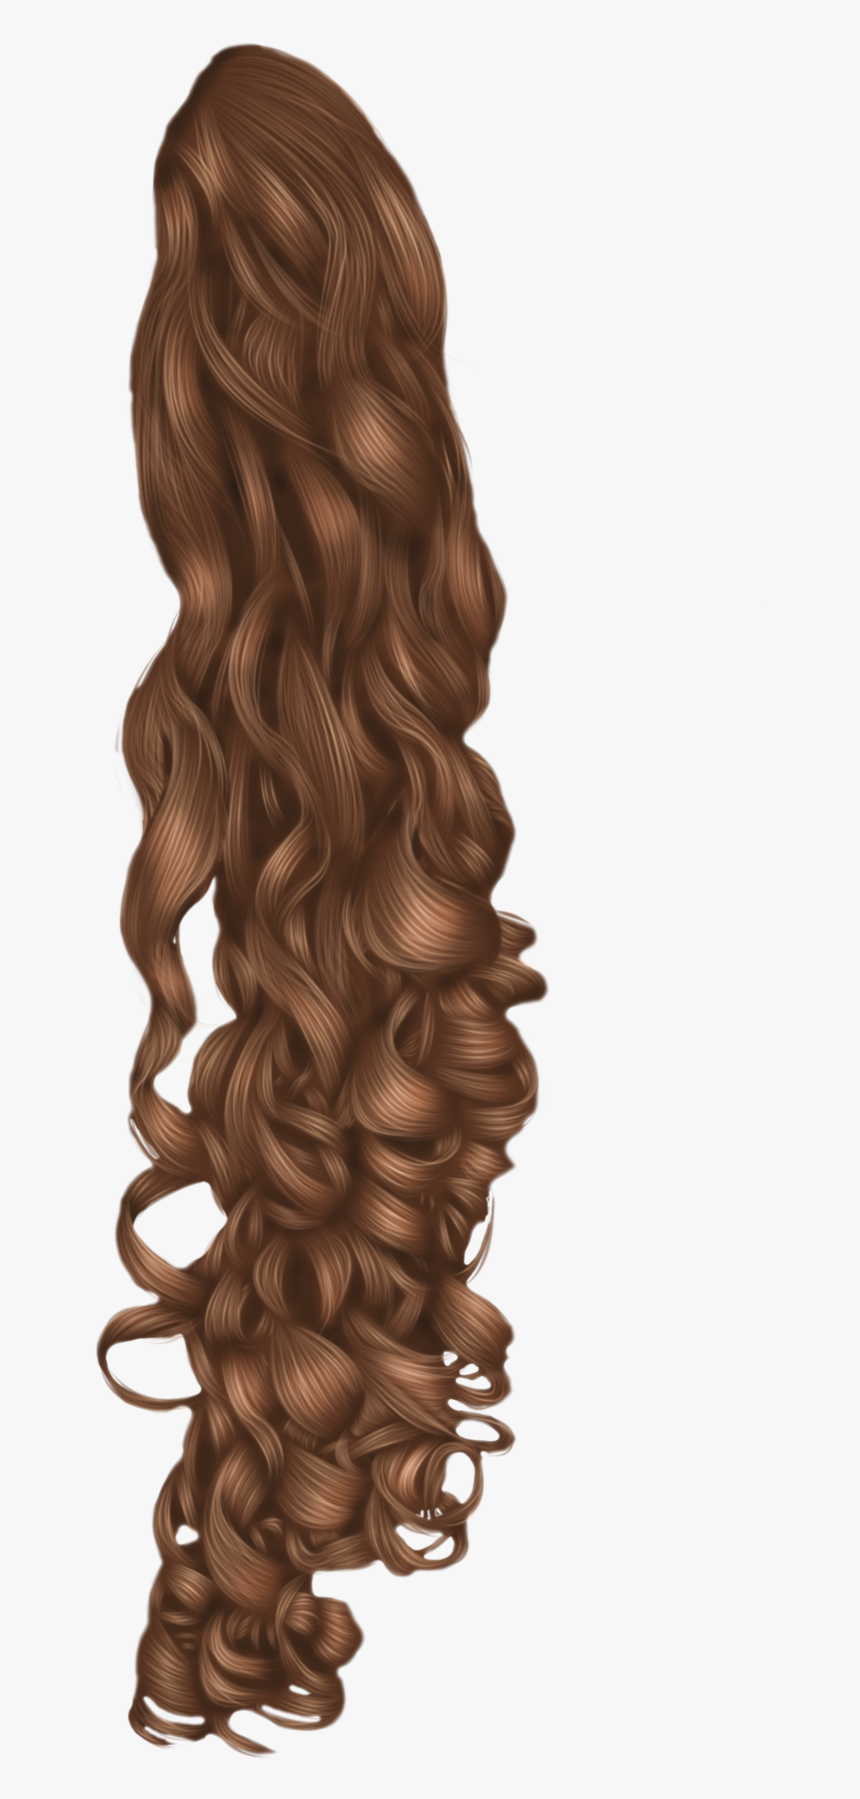 Black Hair Wig Hairstyle Curly Hair Png Transparent Png